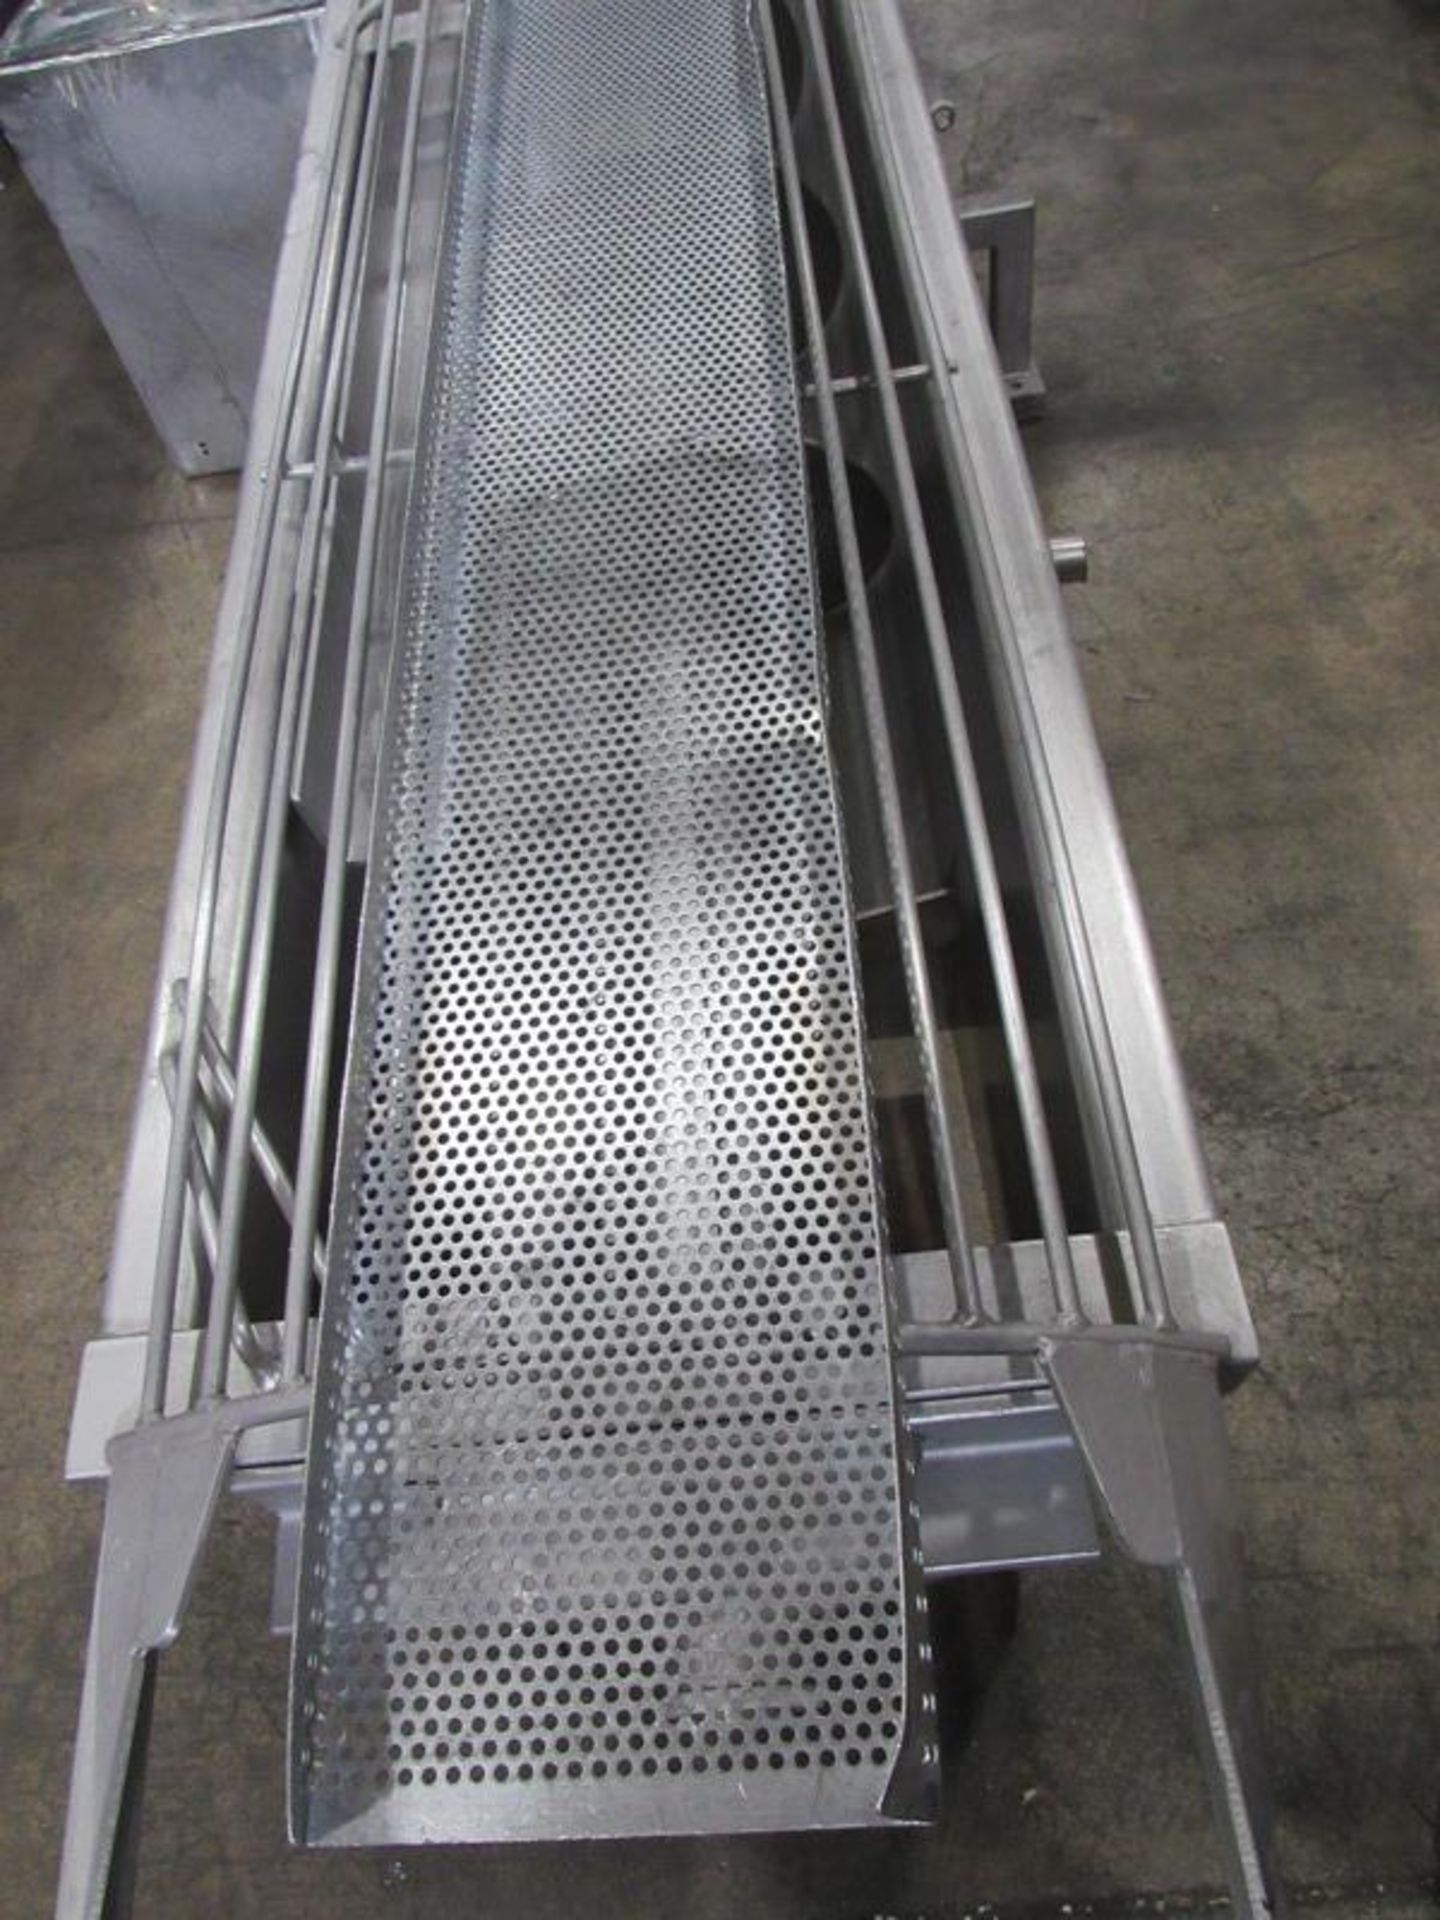 Portable Stainless Steel Carts, 43" W X 52" L X 5' T, 34 removable perforated trays, 8" W X 48" L, - Image 3 of 5